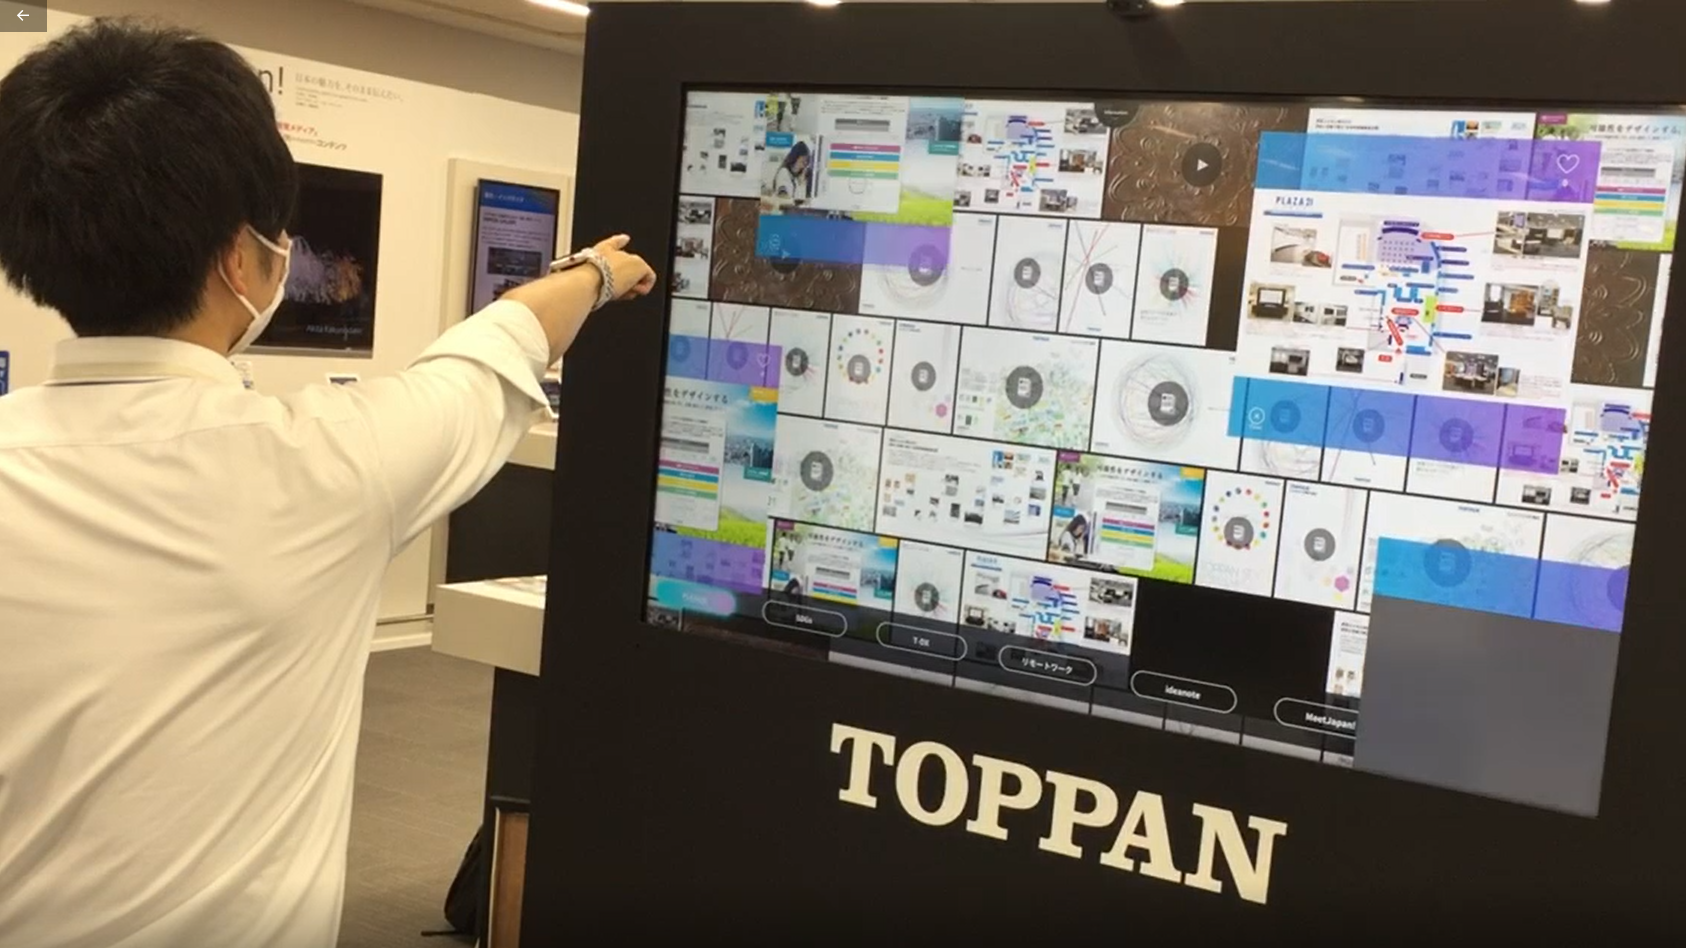 Digital signage technology that can be operated without touching the screen, jointly developed with Toppan Printing CO., LTD.